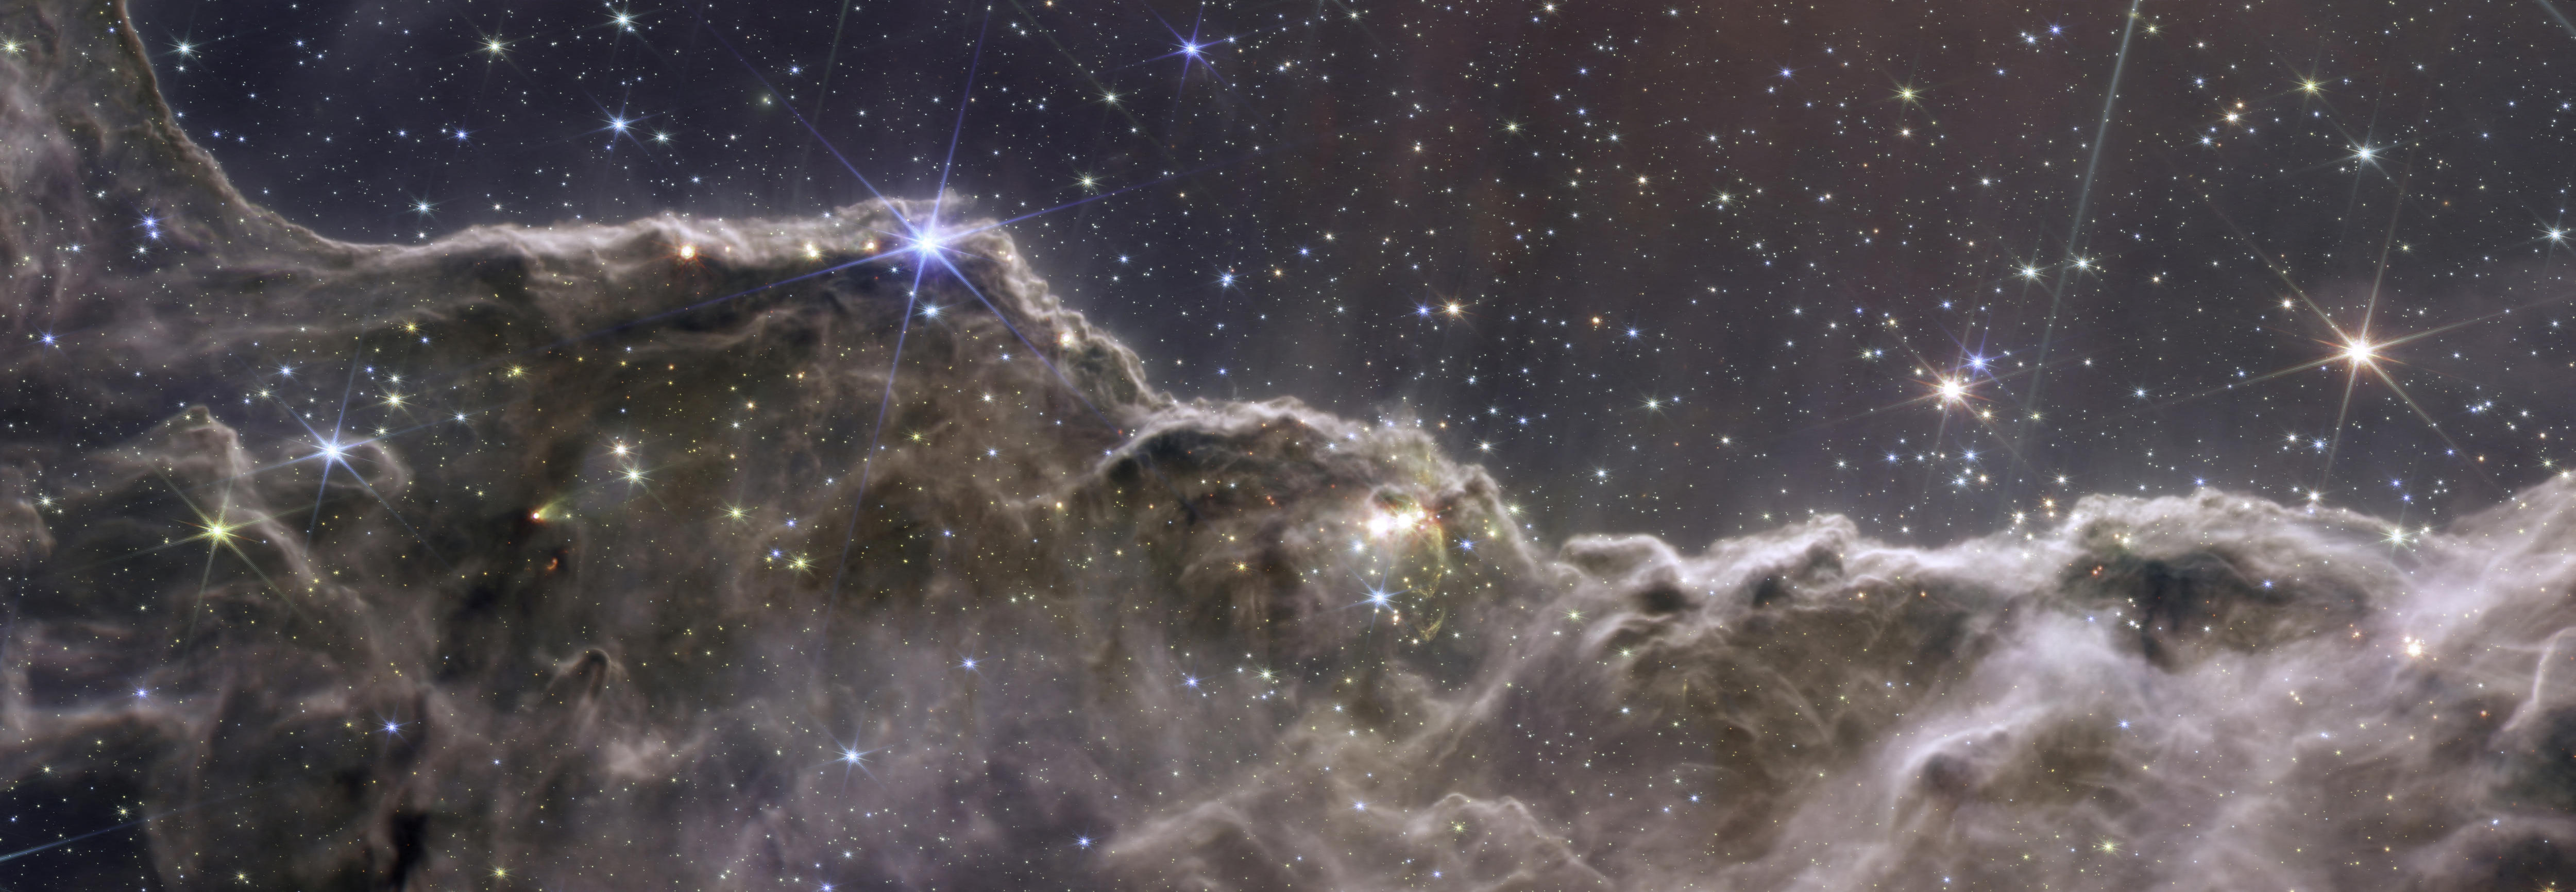 A composite image of the Cosmic Cliffs in the Carina Nebula